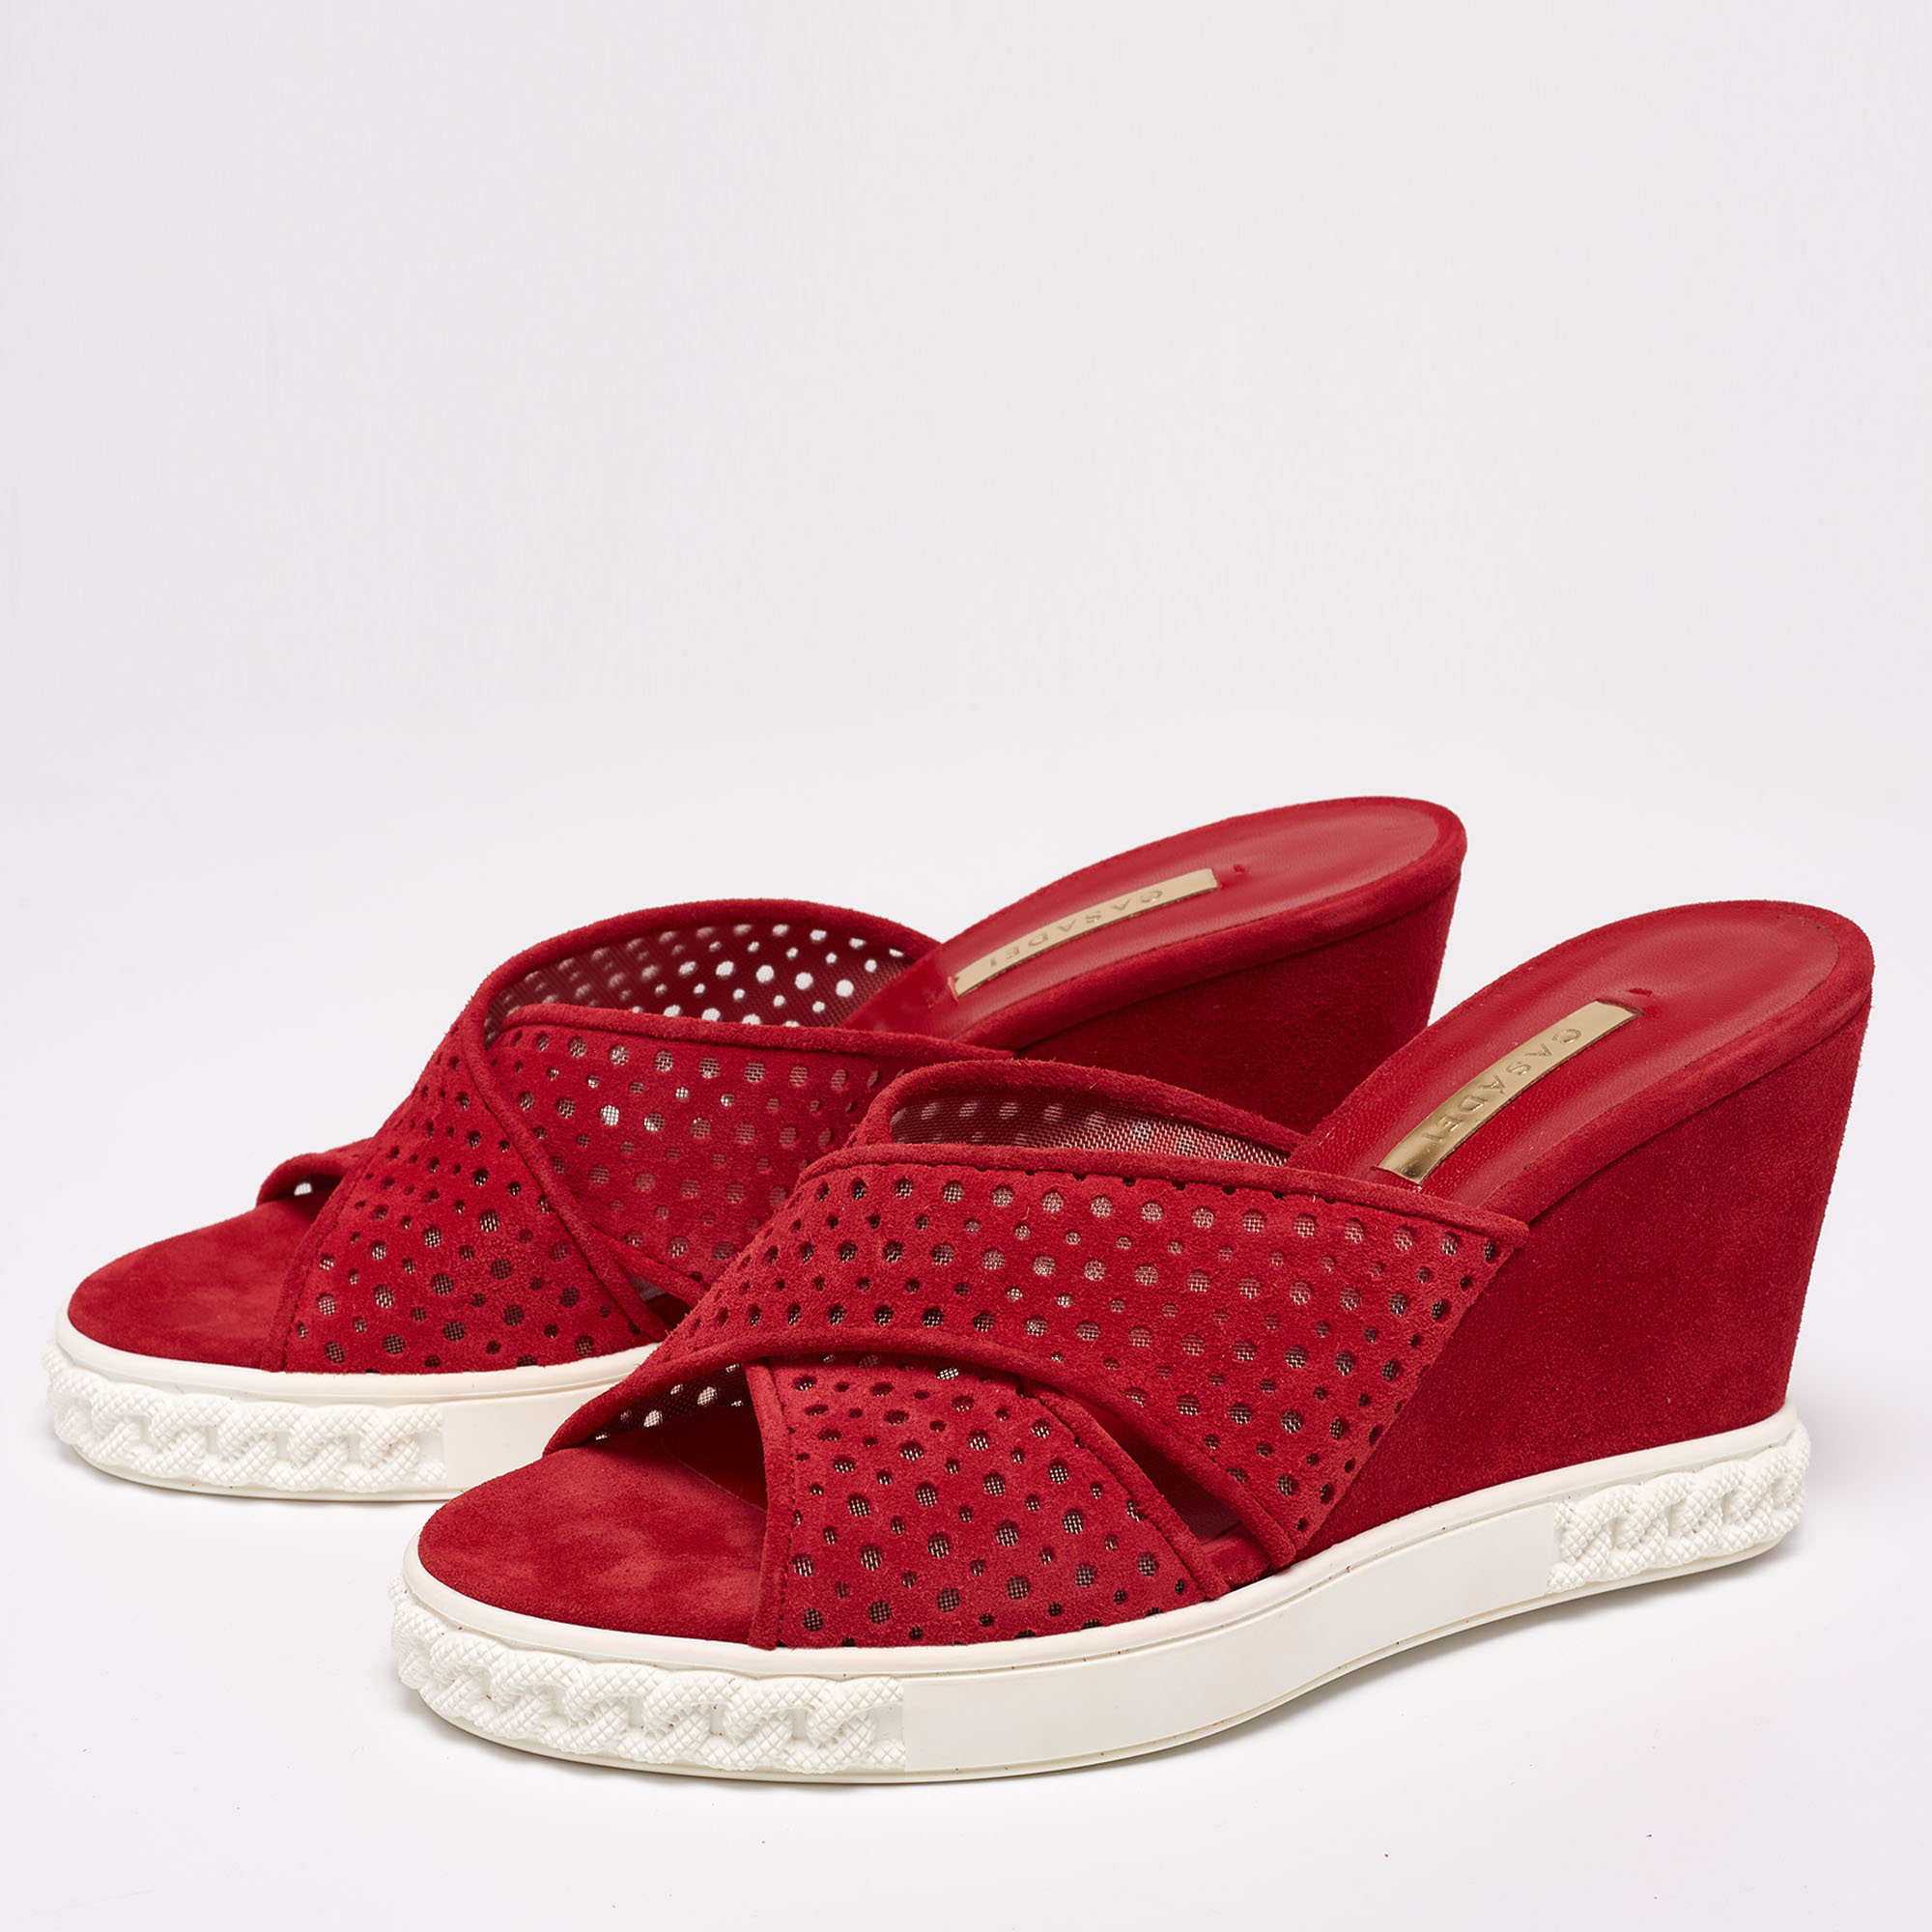 

Casadei Red Perforated Suede Criss Cross Wedge Sandals Size